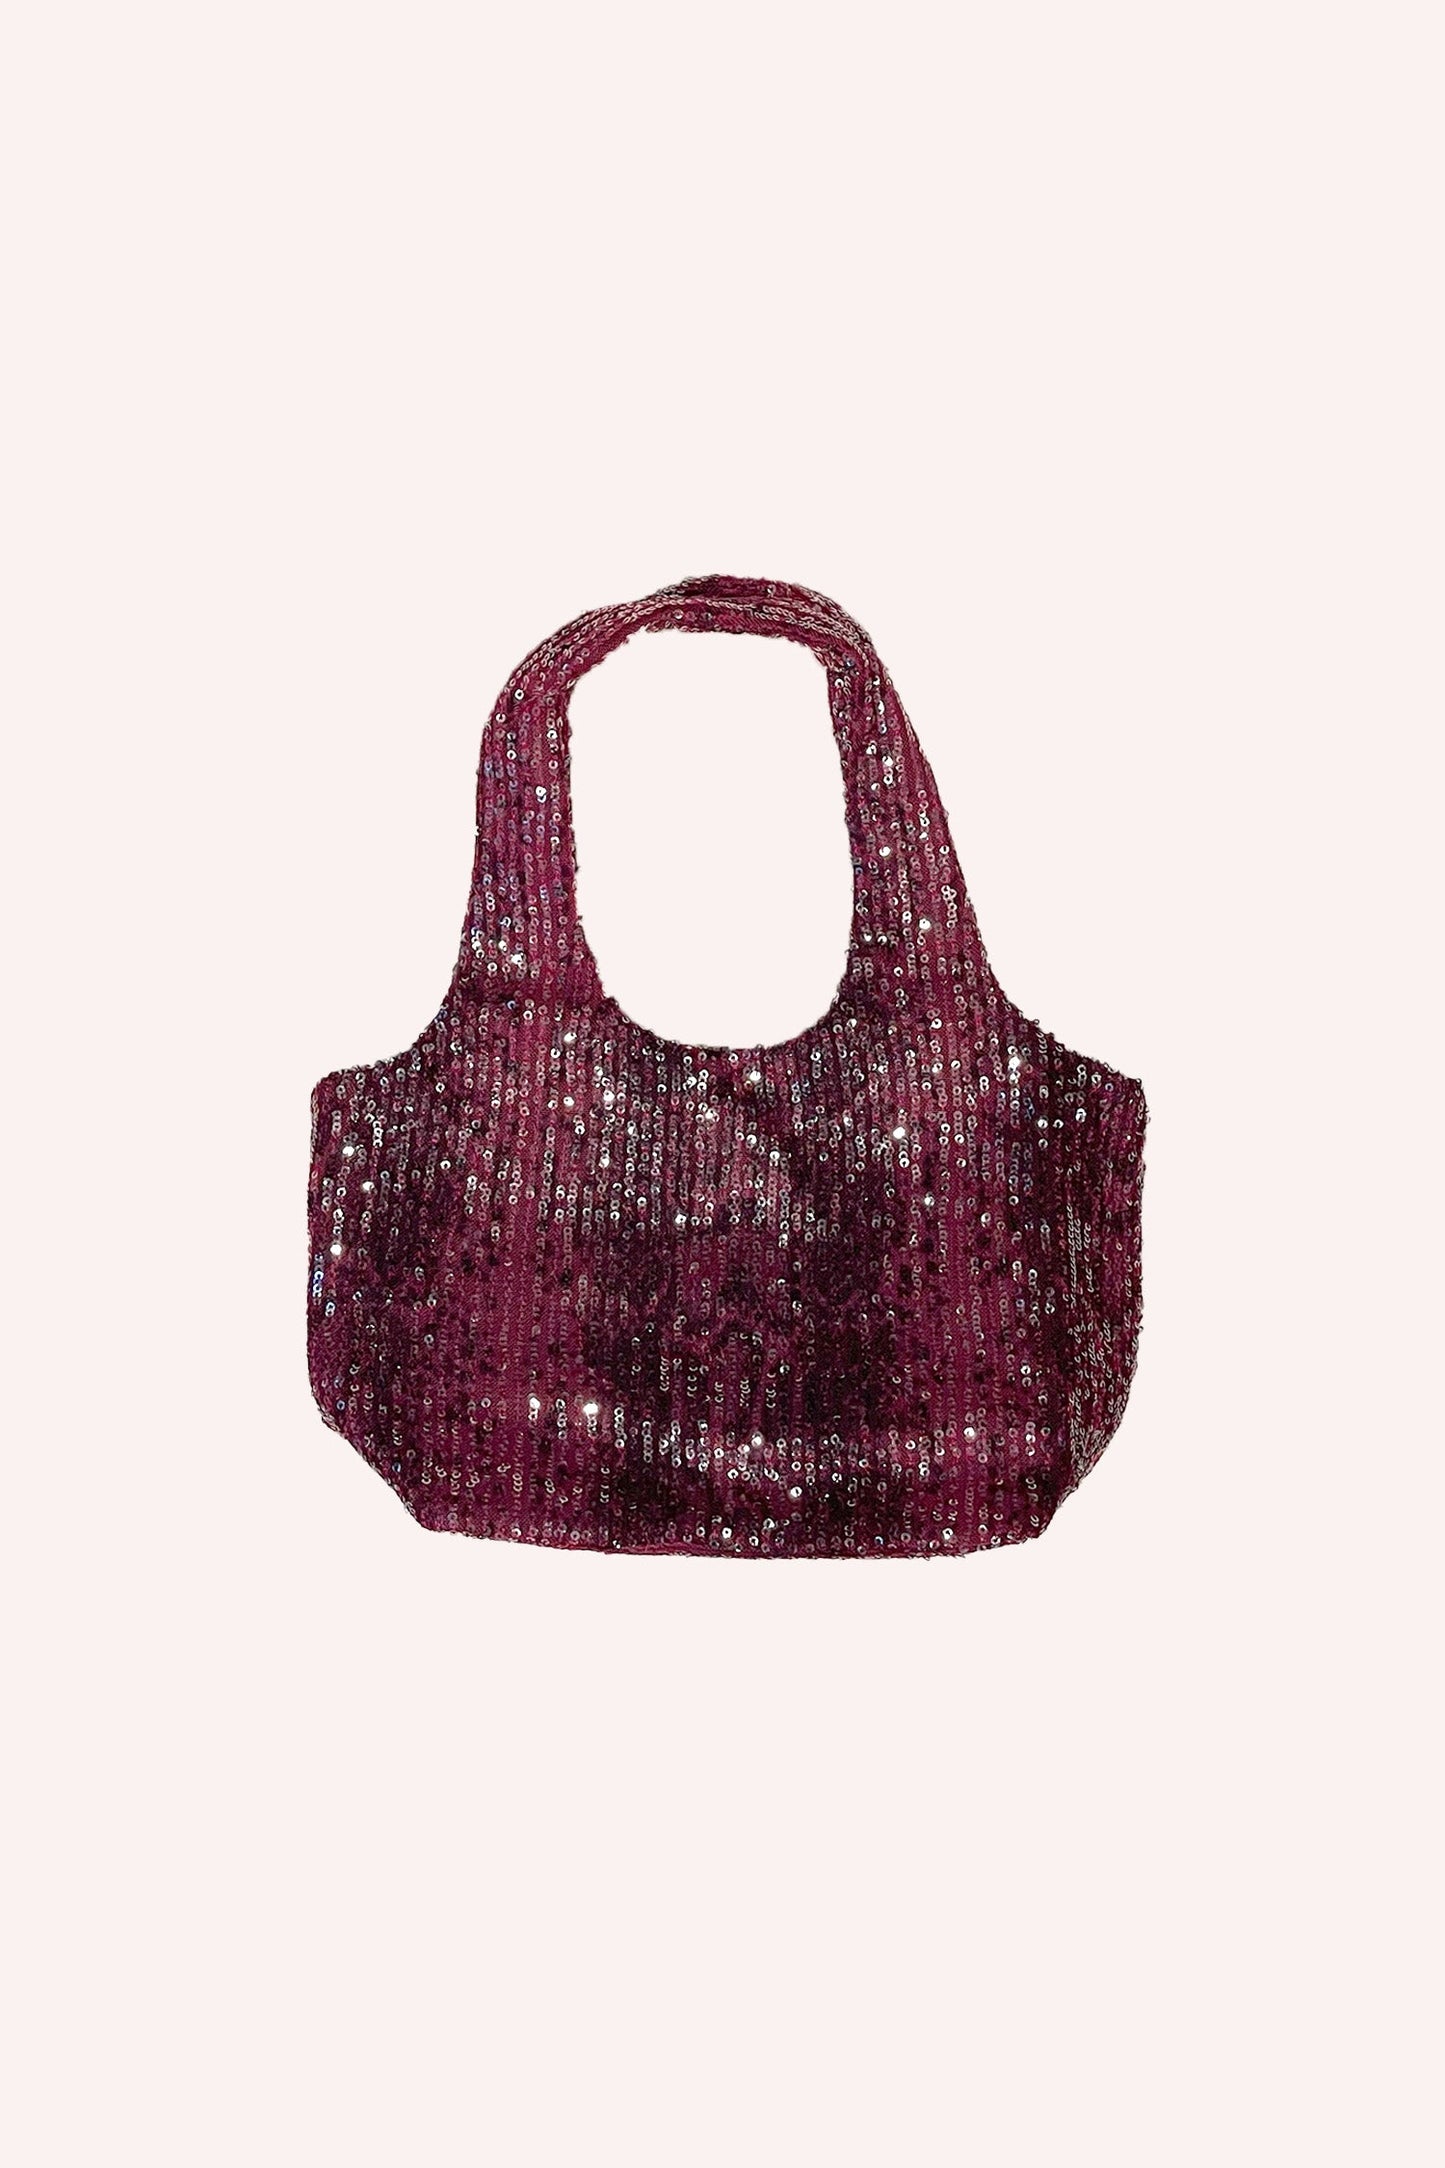 Snakeskin Sequin Mini Bag is in rectangle shape, shiny red ruby, 2 round handles